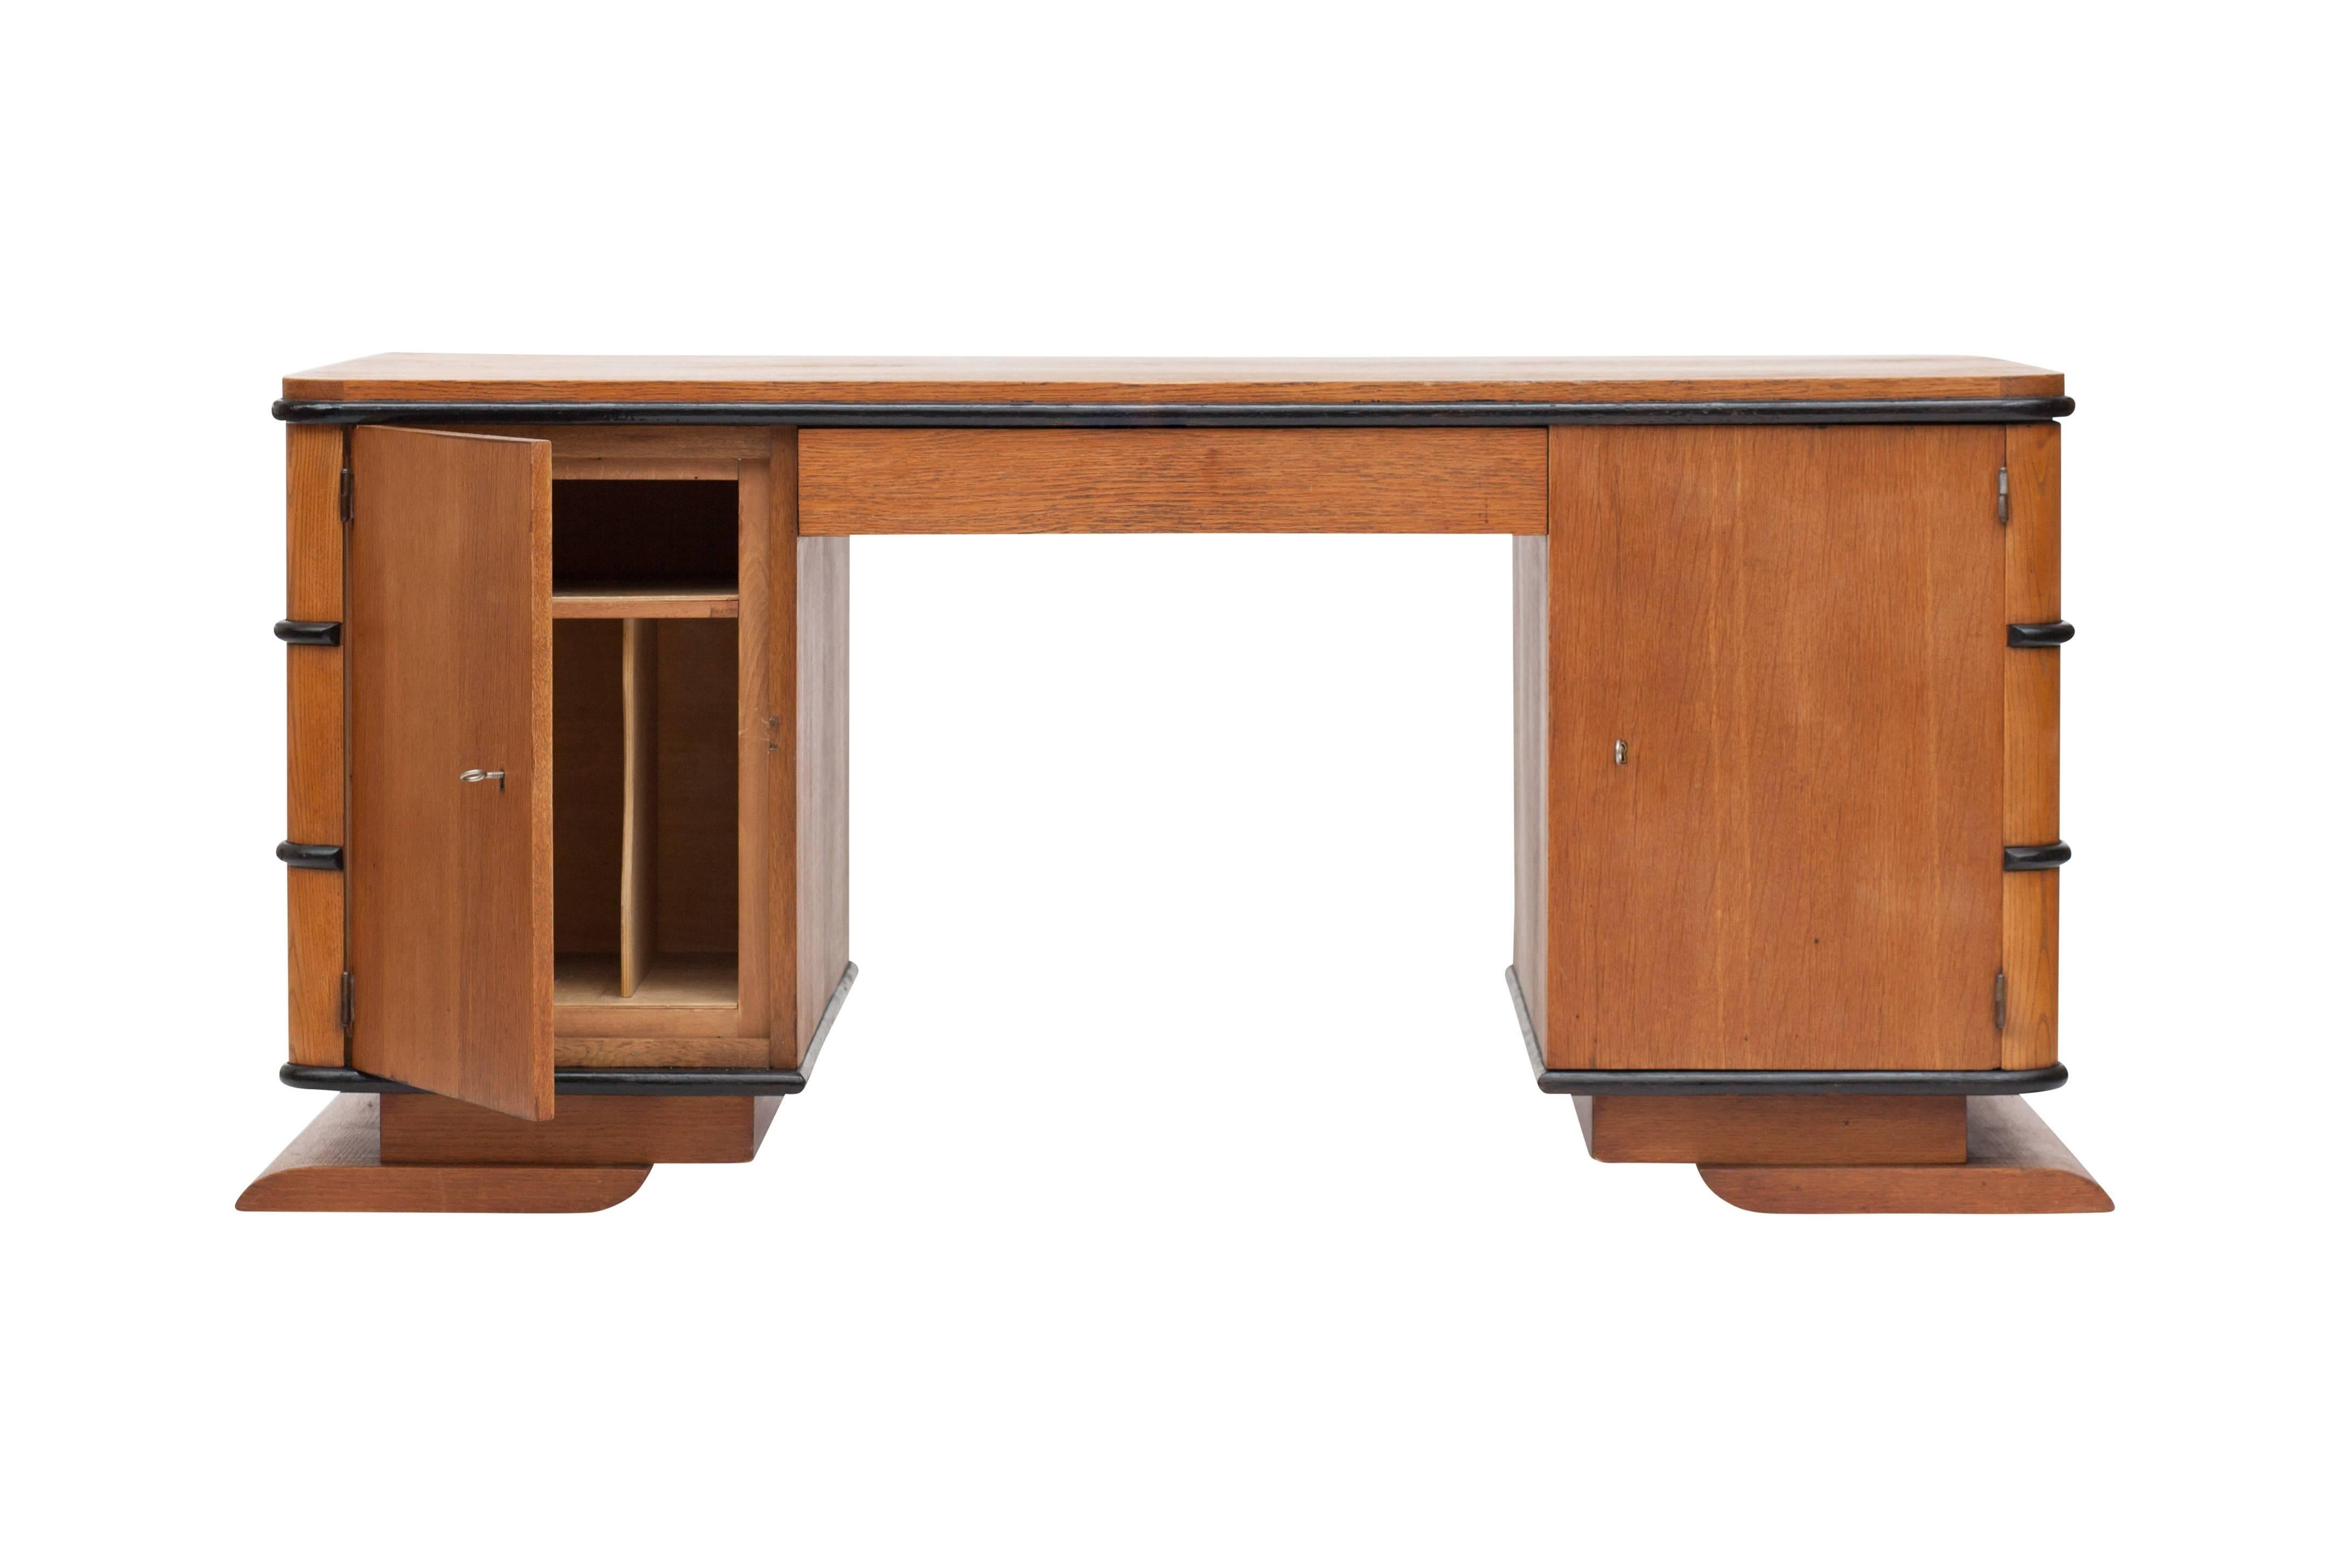 Wonderful streamlined Art Deco writing desk in Oak.

France, 1930s

Horizontal lining referring to streamline modern Art Deco architecture that emphasised curving forms and long horizontal lines. Equipped with multiple drawers and storage